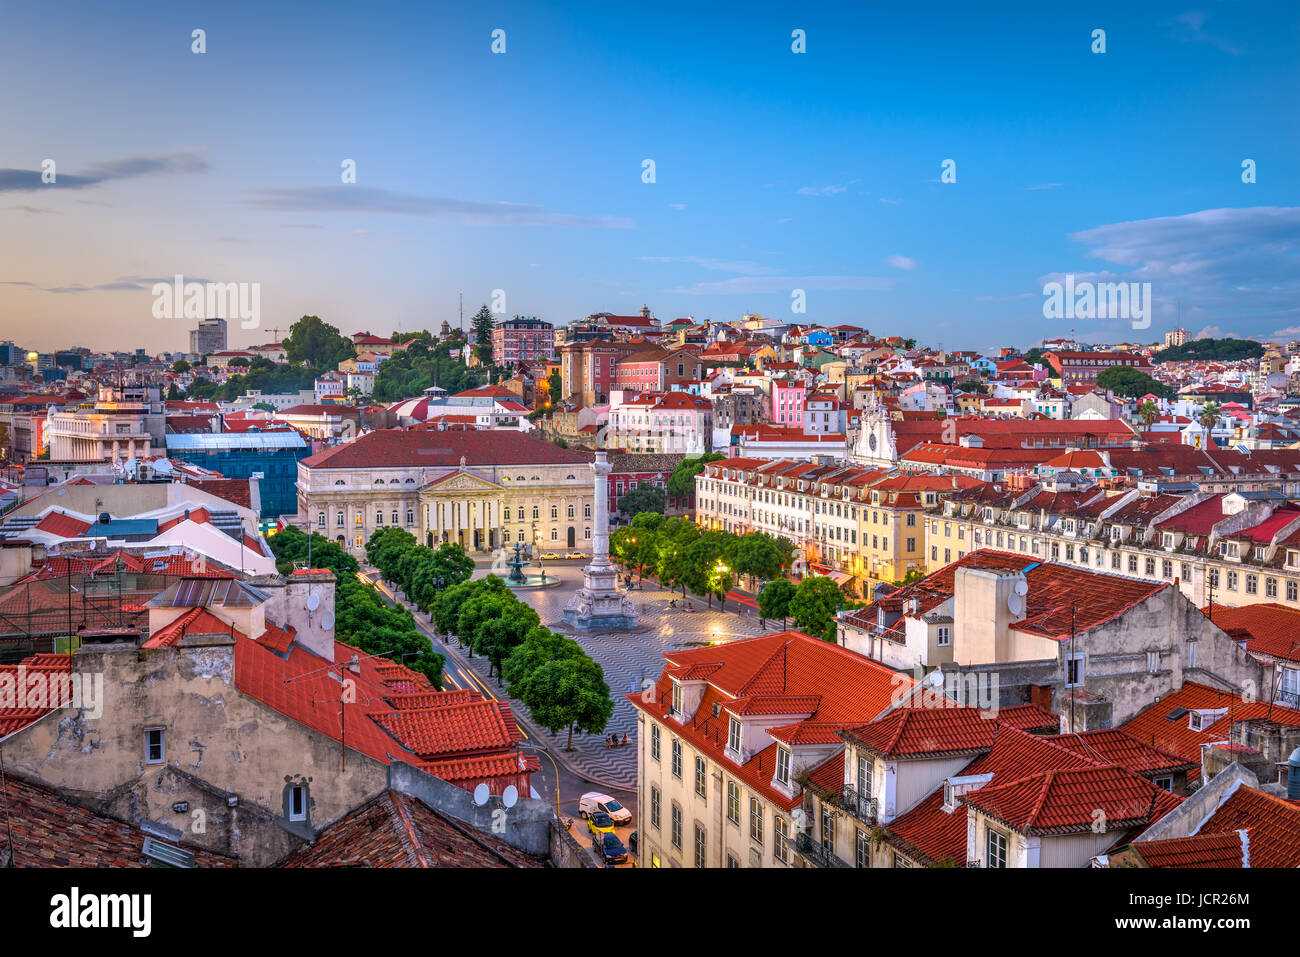 Lisbon, Portugal Pombaline district skyline over Rossio Square. Stock Photo